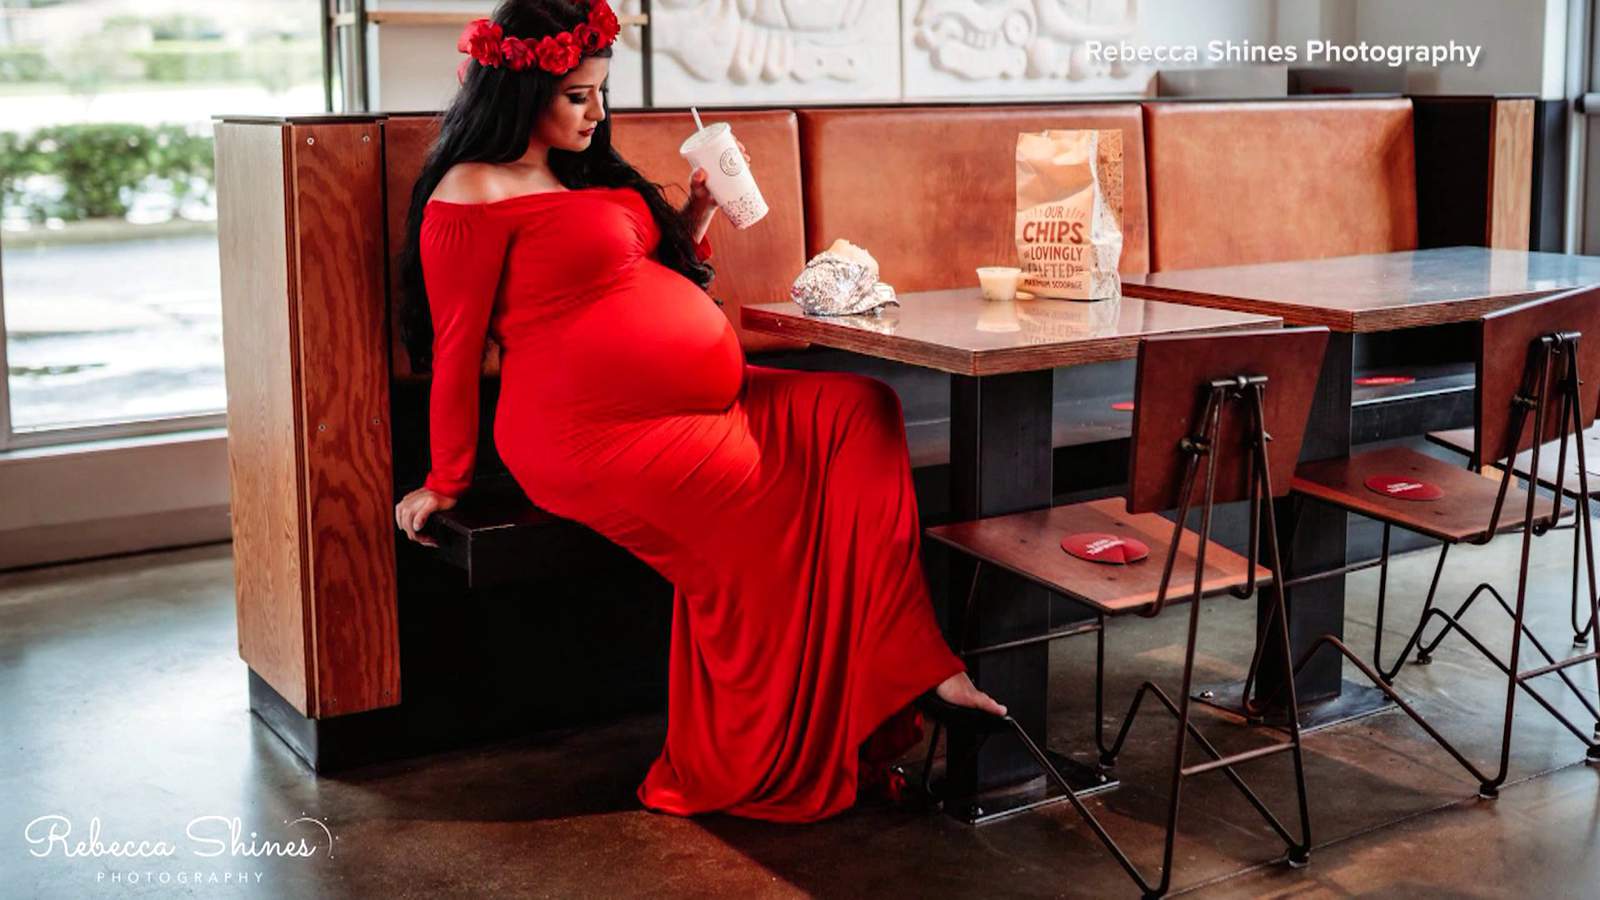 Lake Mary mom channeled pregnancy cravings in Chipotle photo shoot